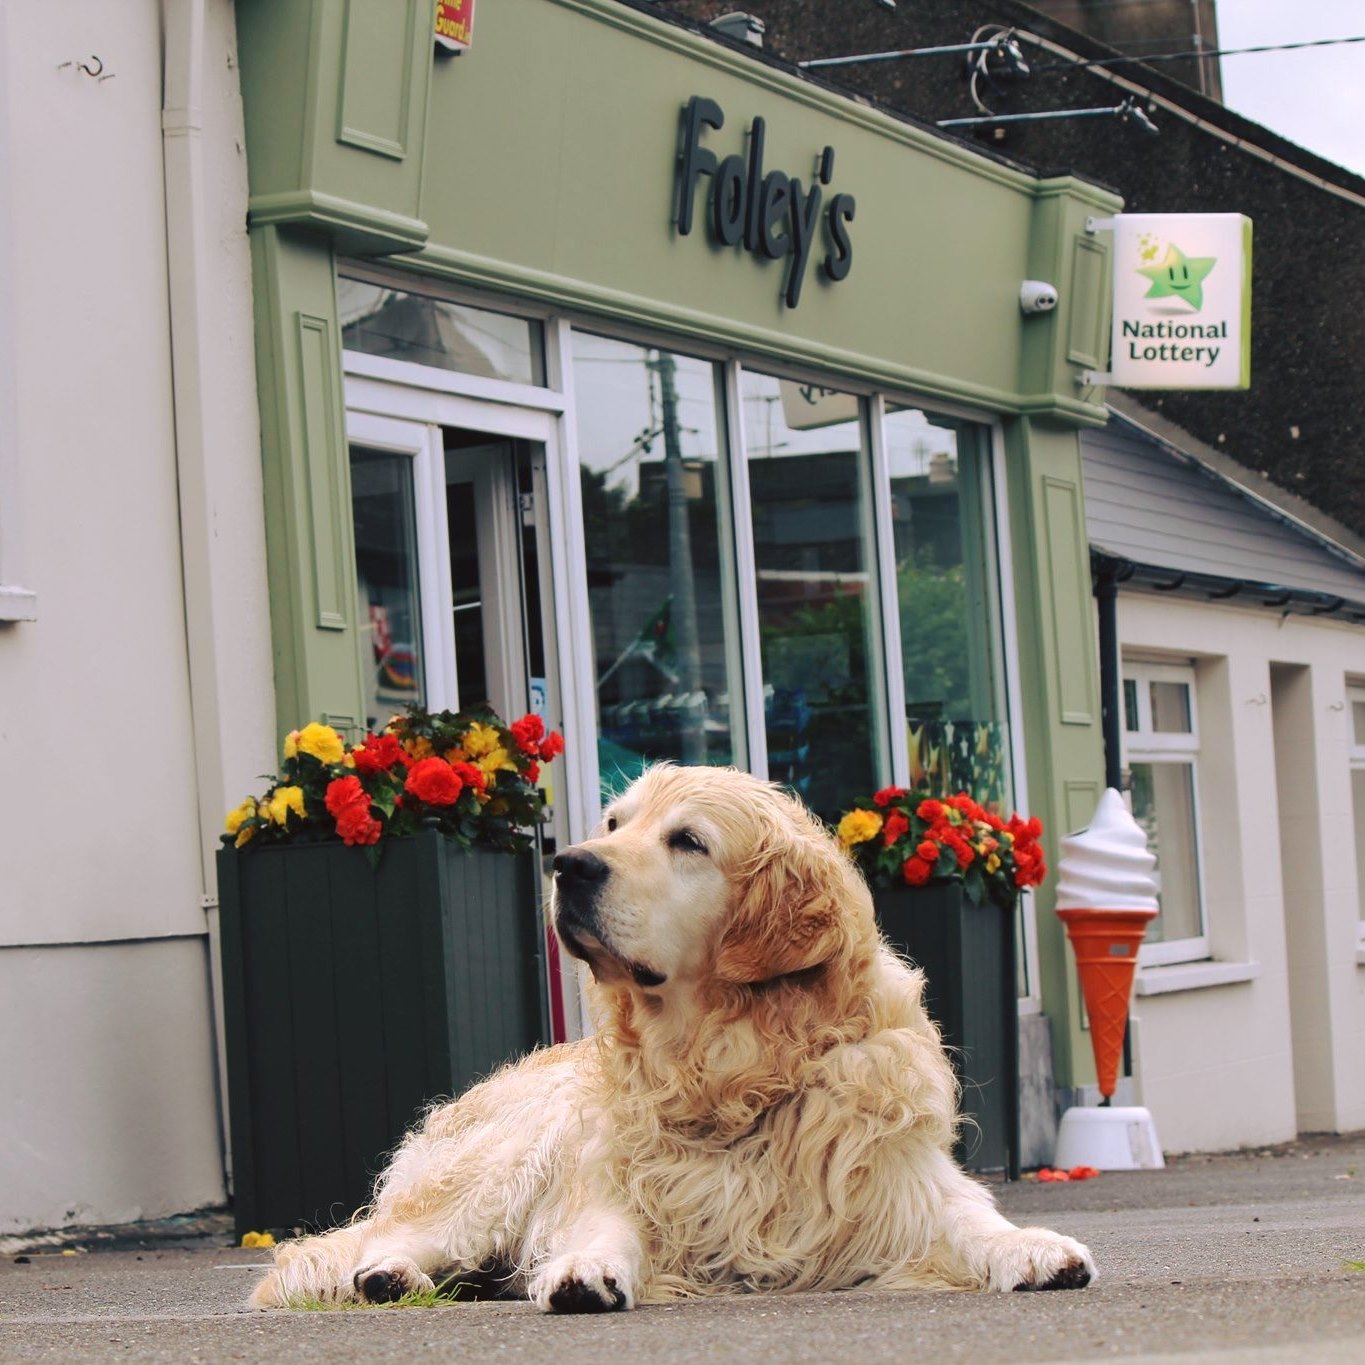 Foley's Express Food Store in Mallow, Co Cork